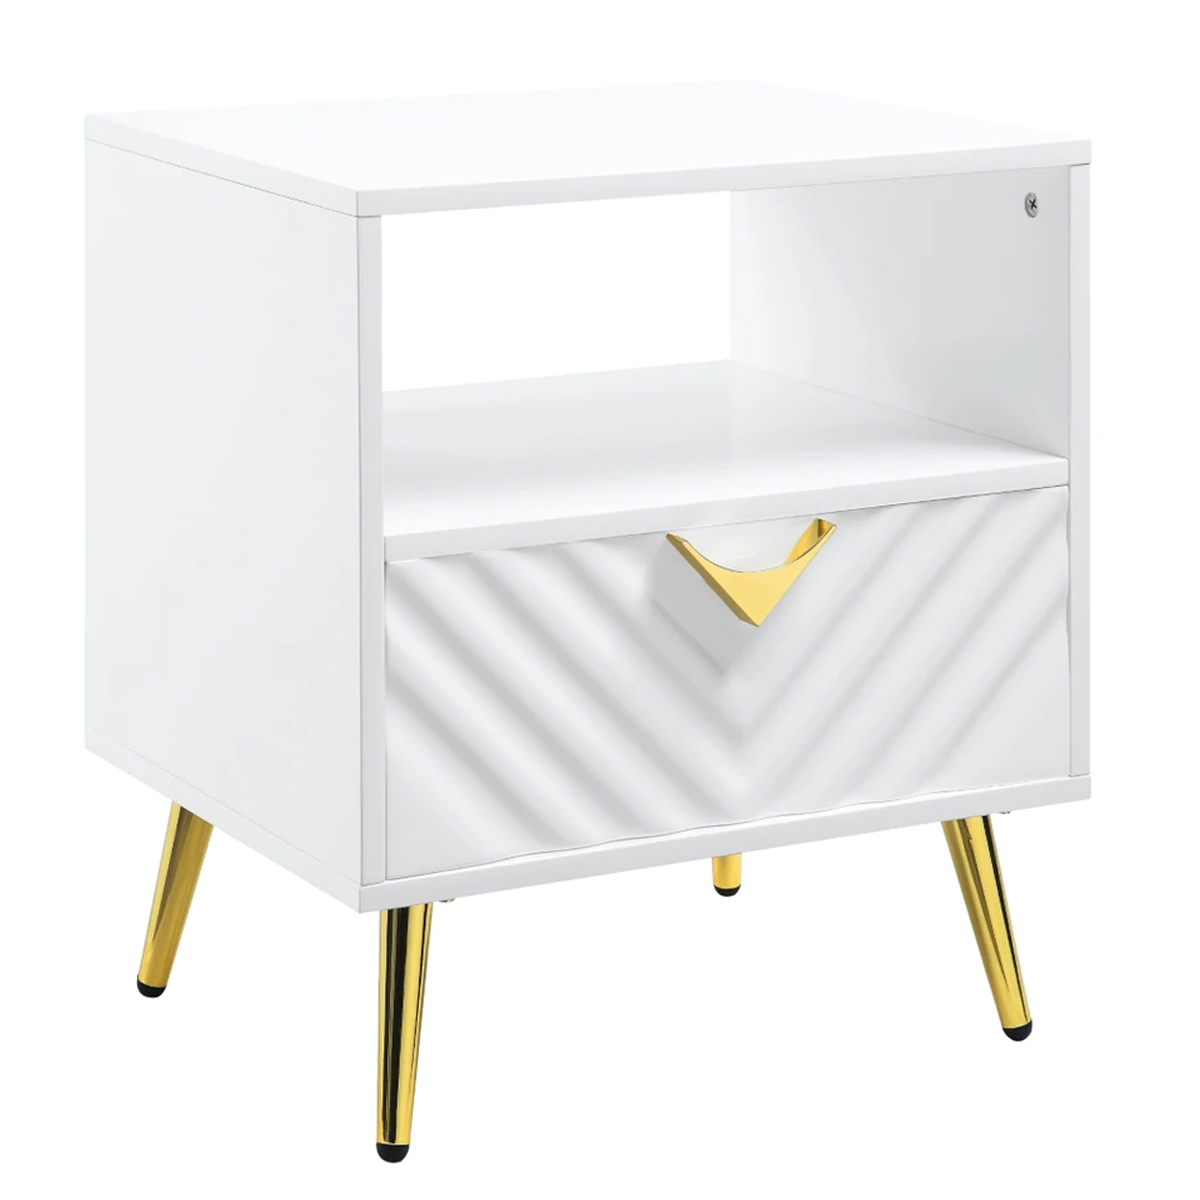 Tyra 22 Inch Wood End Table With Open Space, Wave Pattern, White, Gold- Saltoro Sherpi